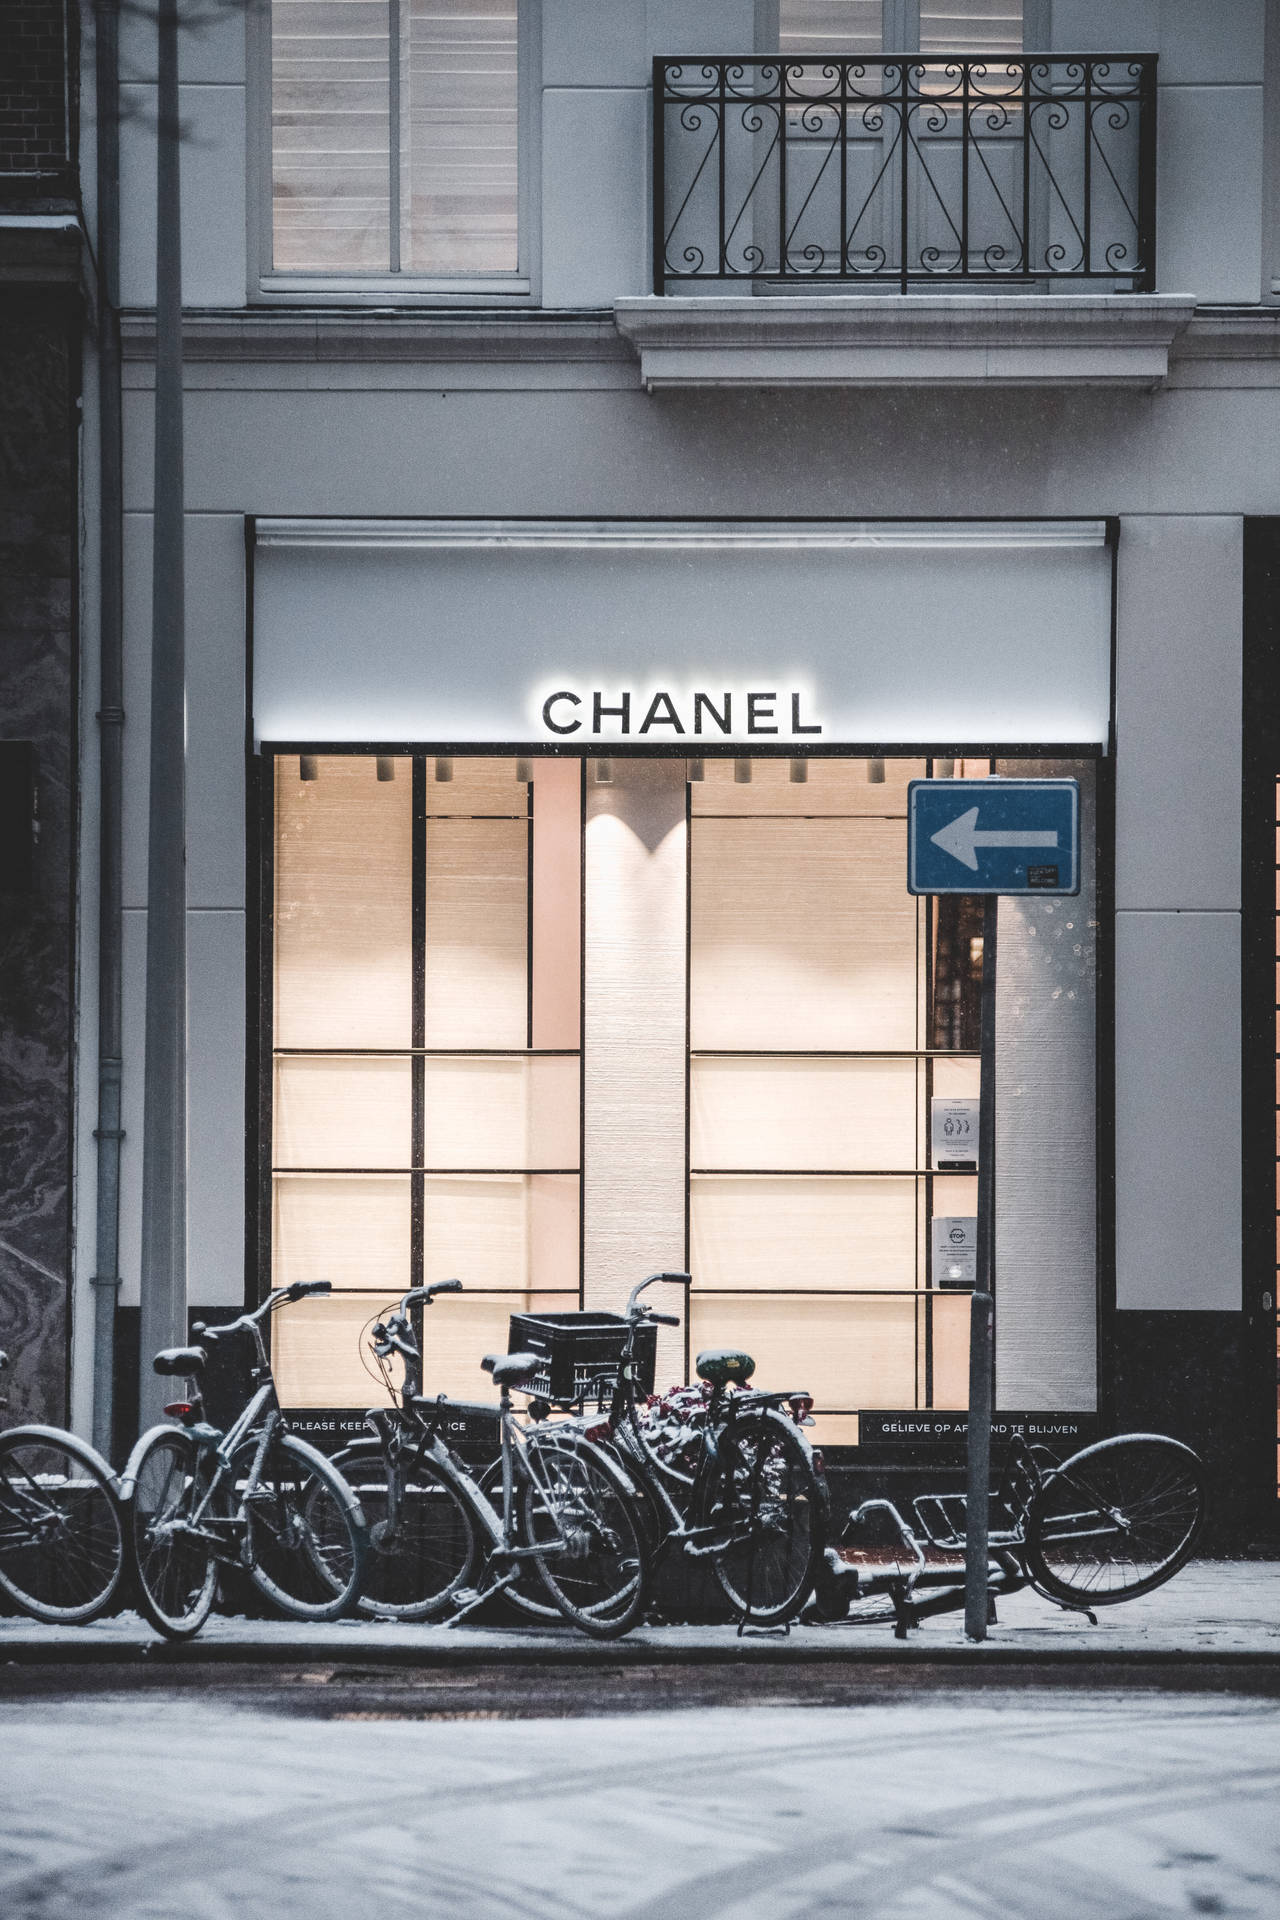 Chanel Store With Amsterdam Bicycles Background